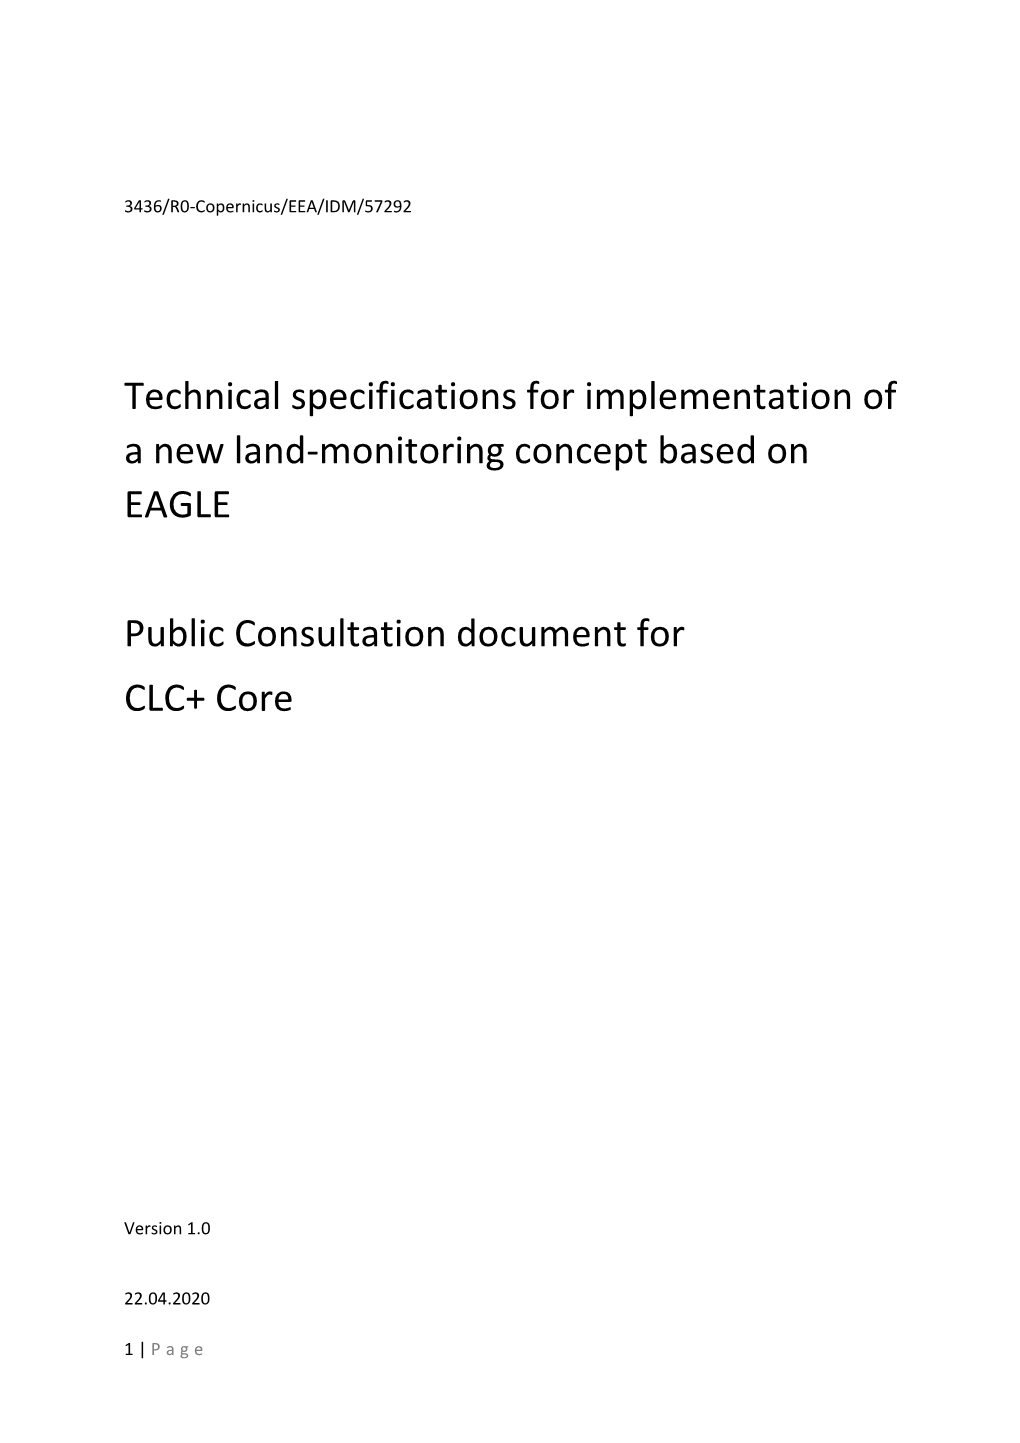 Technical Specifications for Implementation of a New Land-Monitoring Concept Based on EAGLE